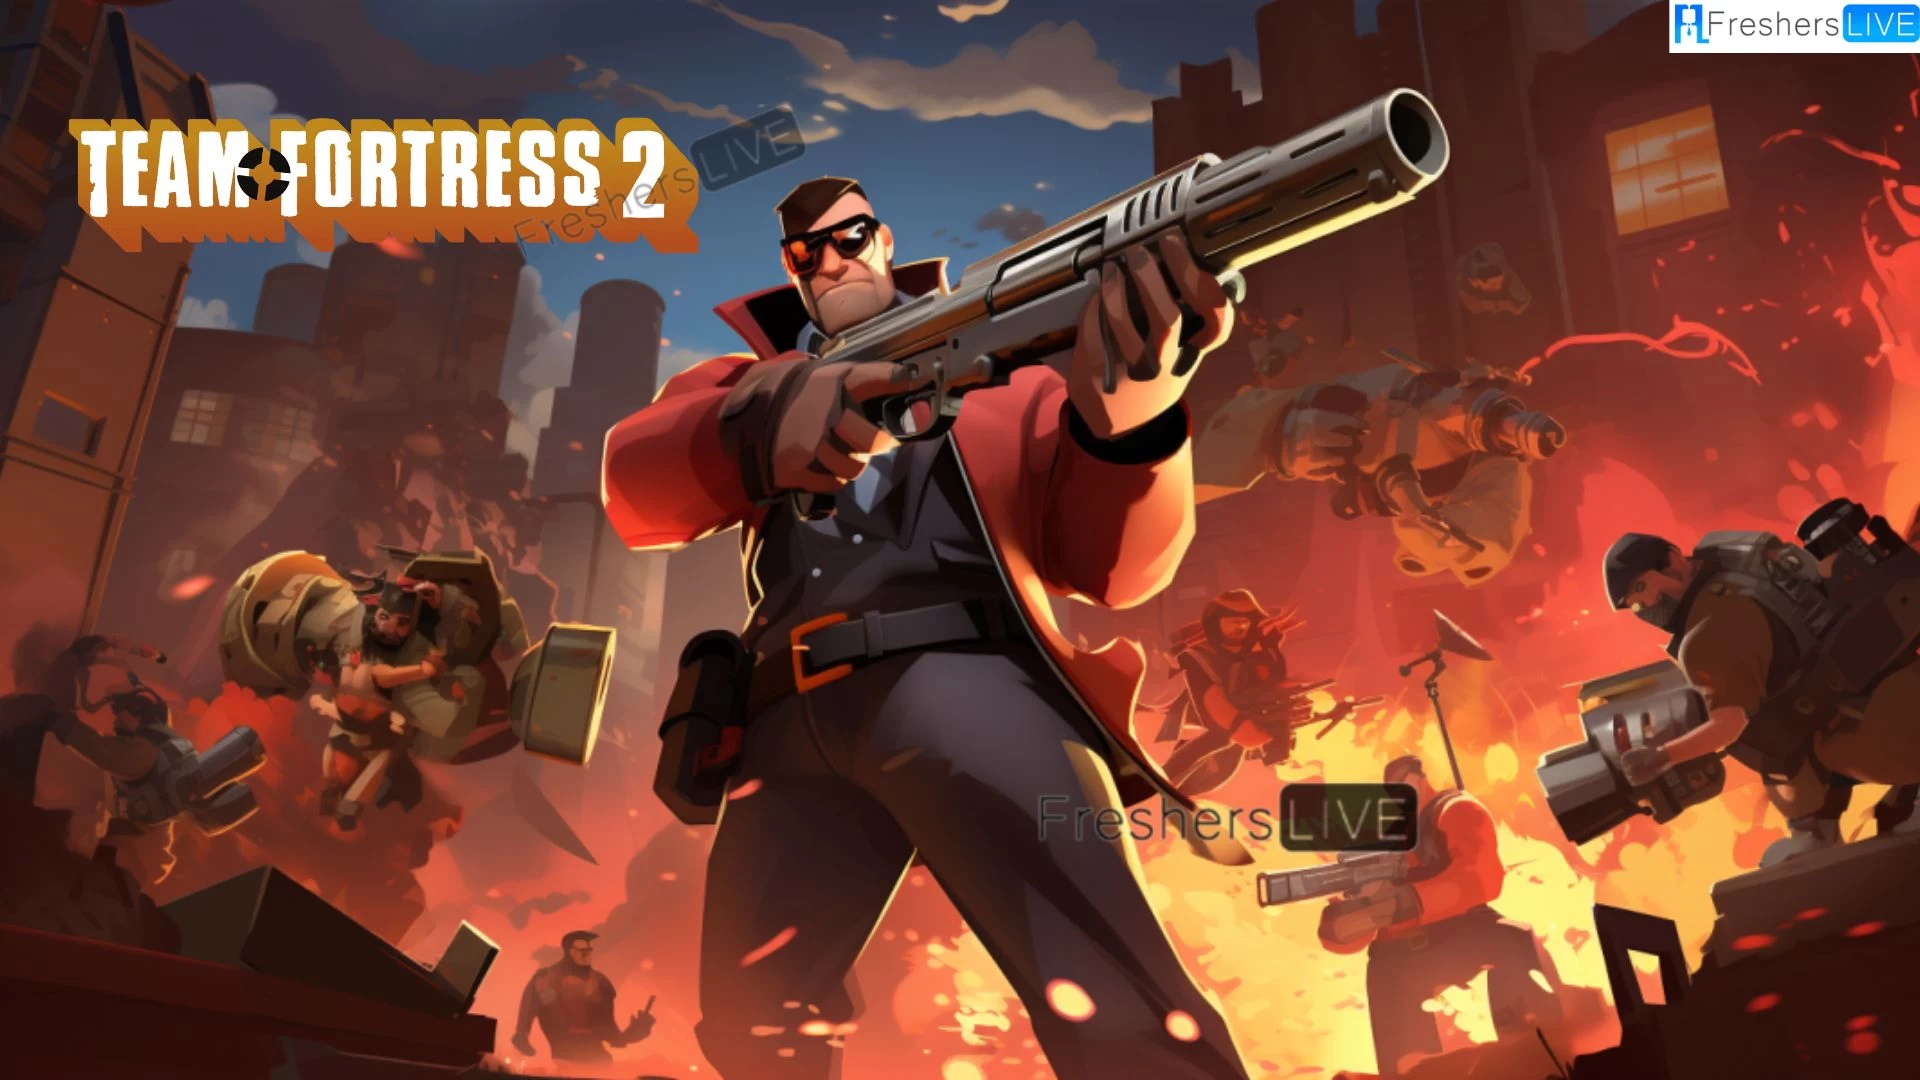 Are TF2 Servers Down? How to Check Team Fortress 2 Server Status?